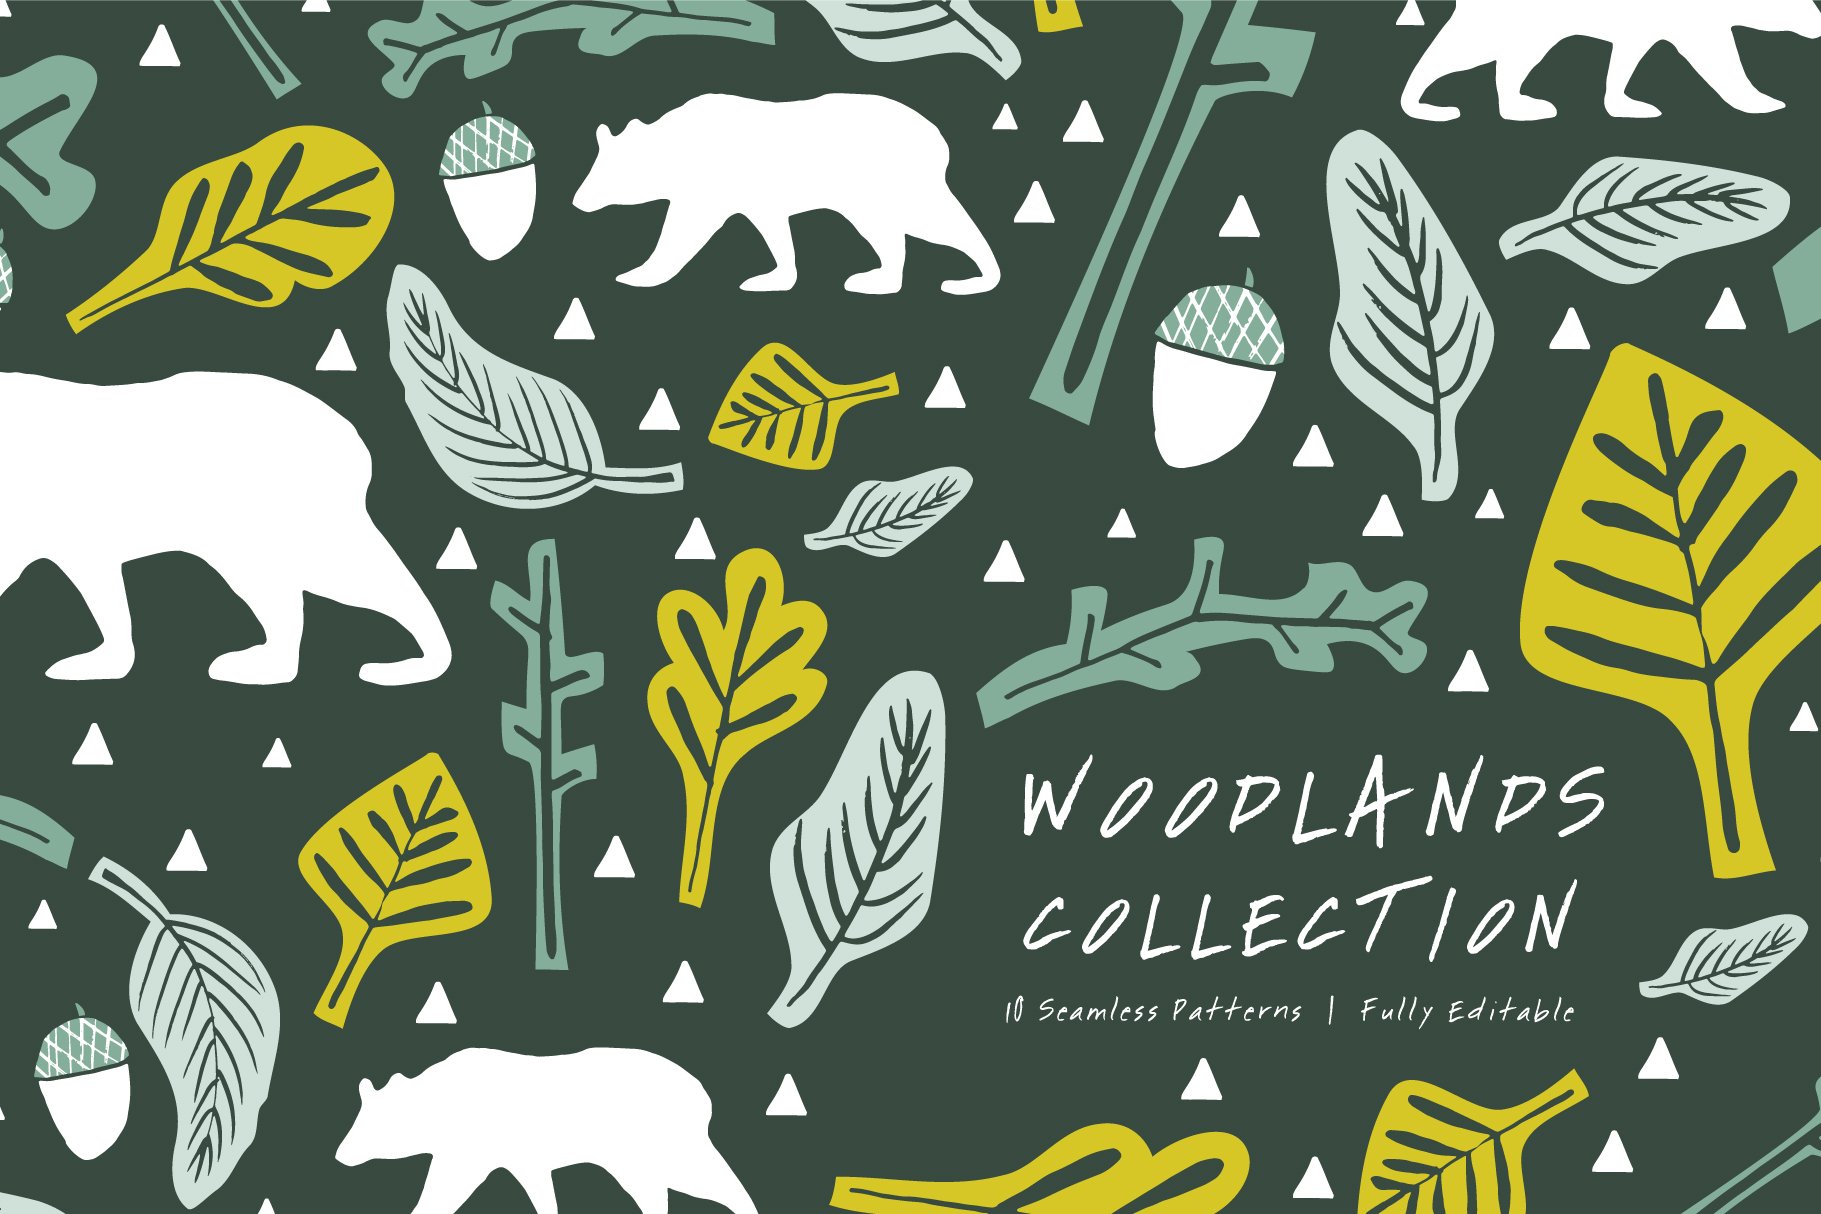 Woodlands | Seamless Patterns cover image.